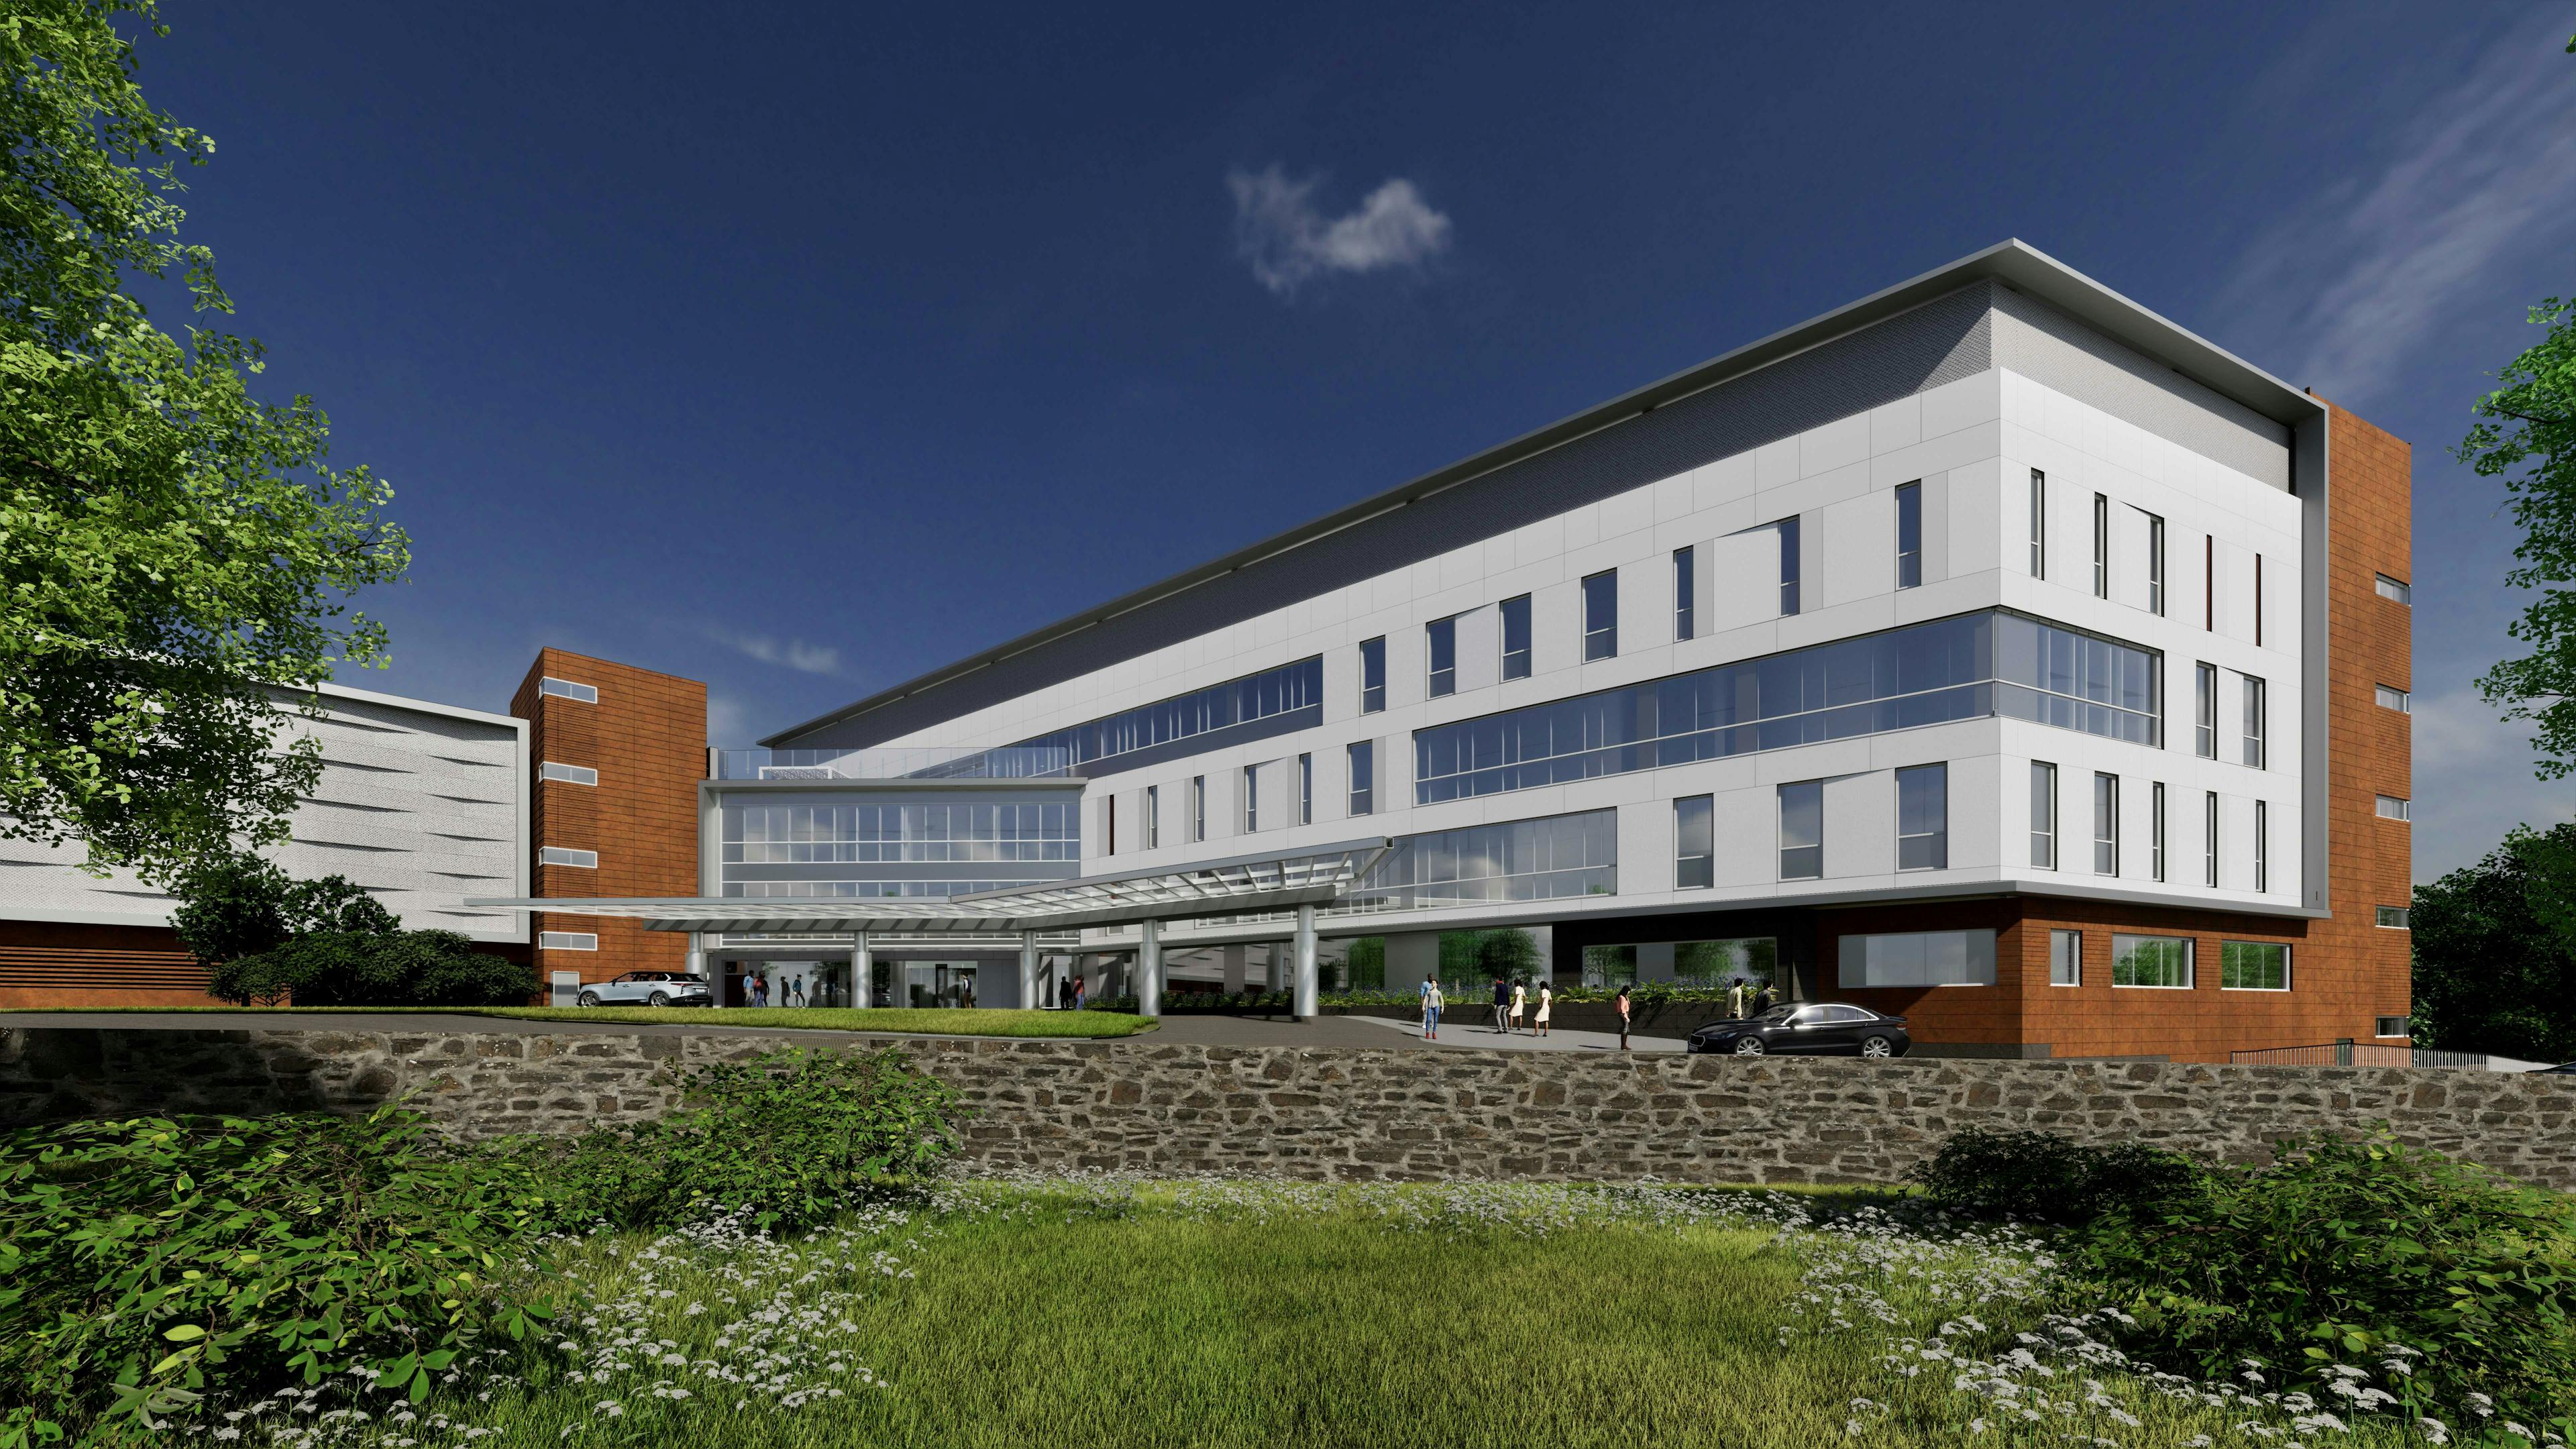 Cooperman Barnabas Medical Center, part of RWJBarnabas Health, broke ground on a new $225 million cancer center. It's slated to open in 2025. This rendering was provided by RWJBarnabas Health.